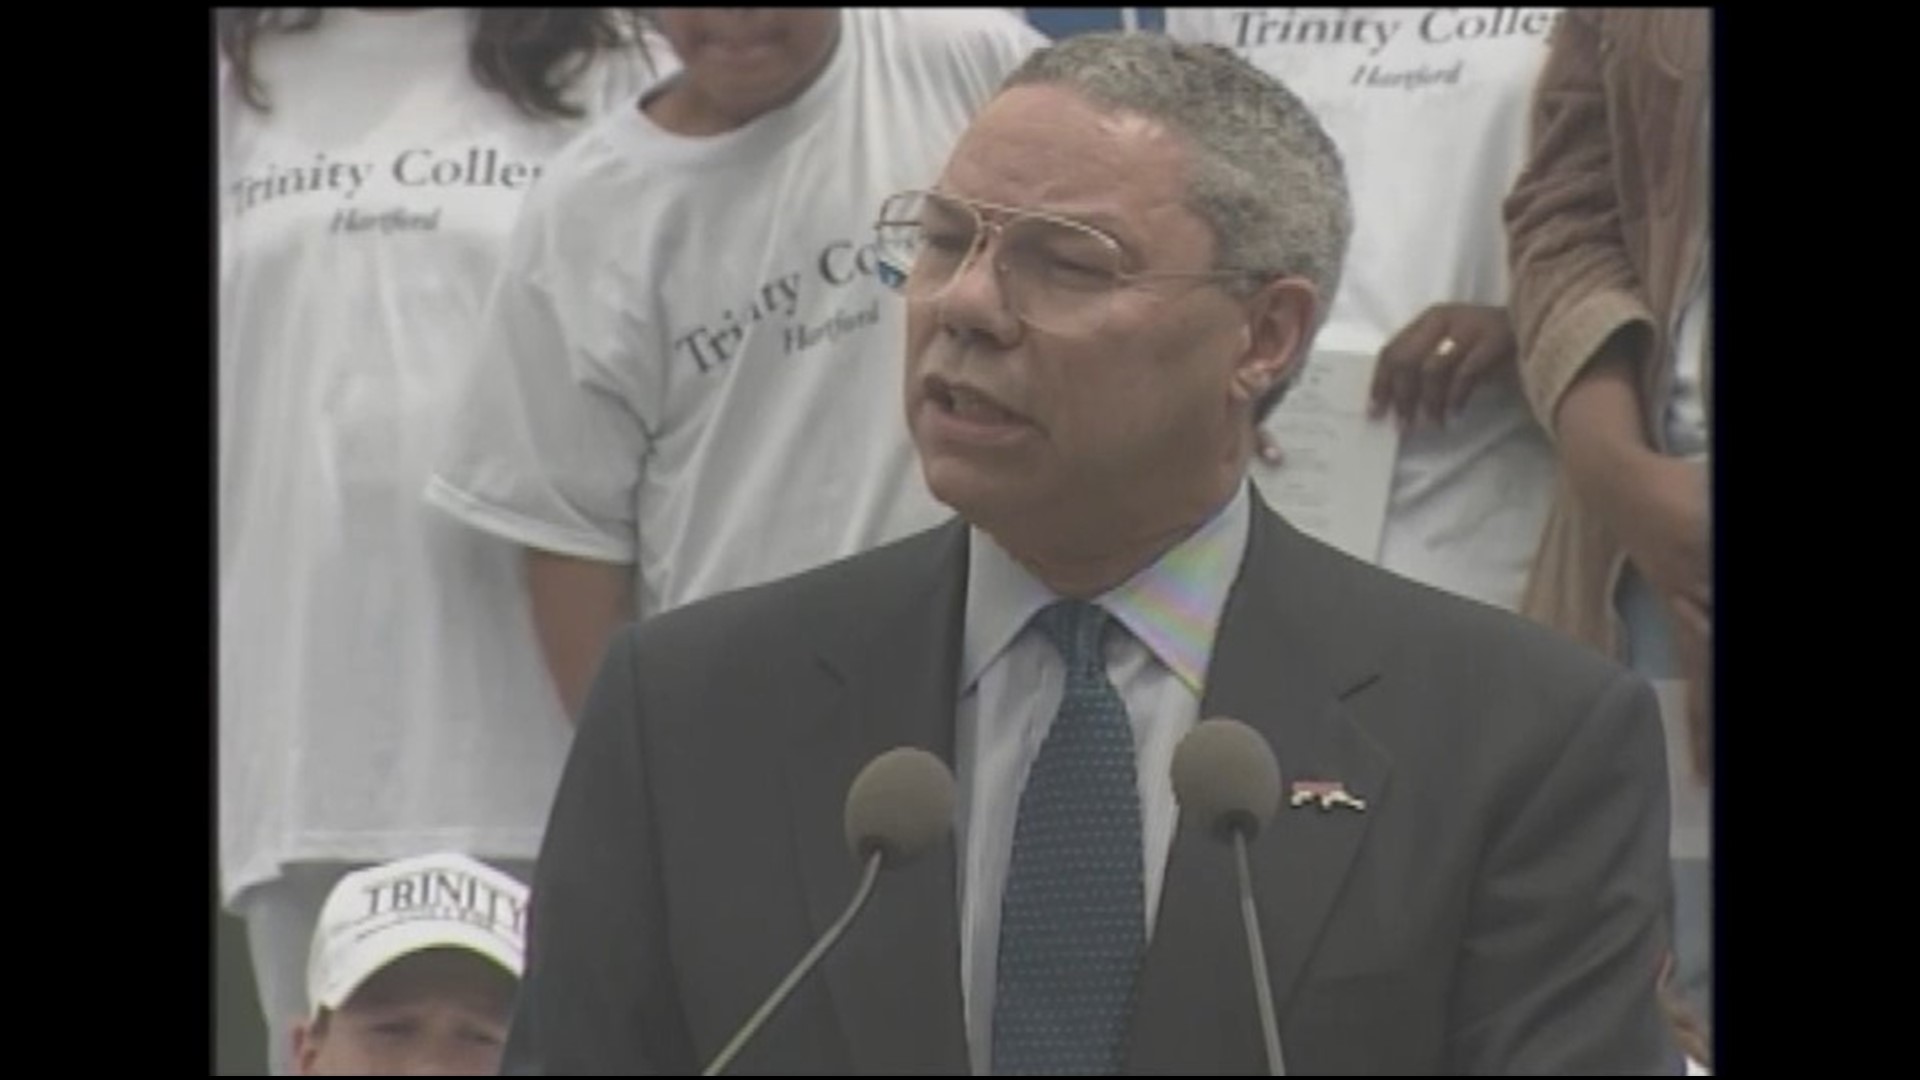 Powell spoke at the dedication of the Boys and Girls Club at Trinity College